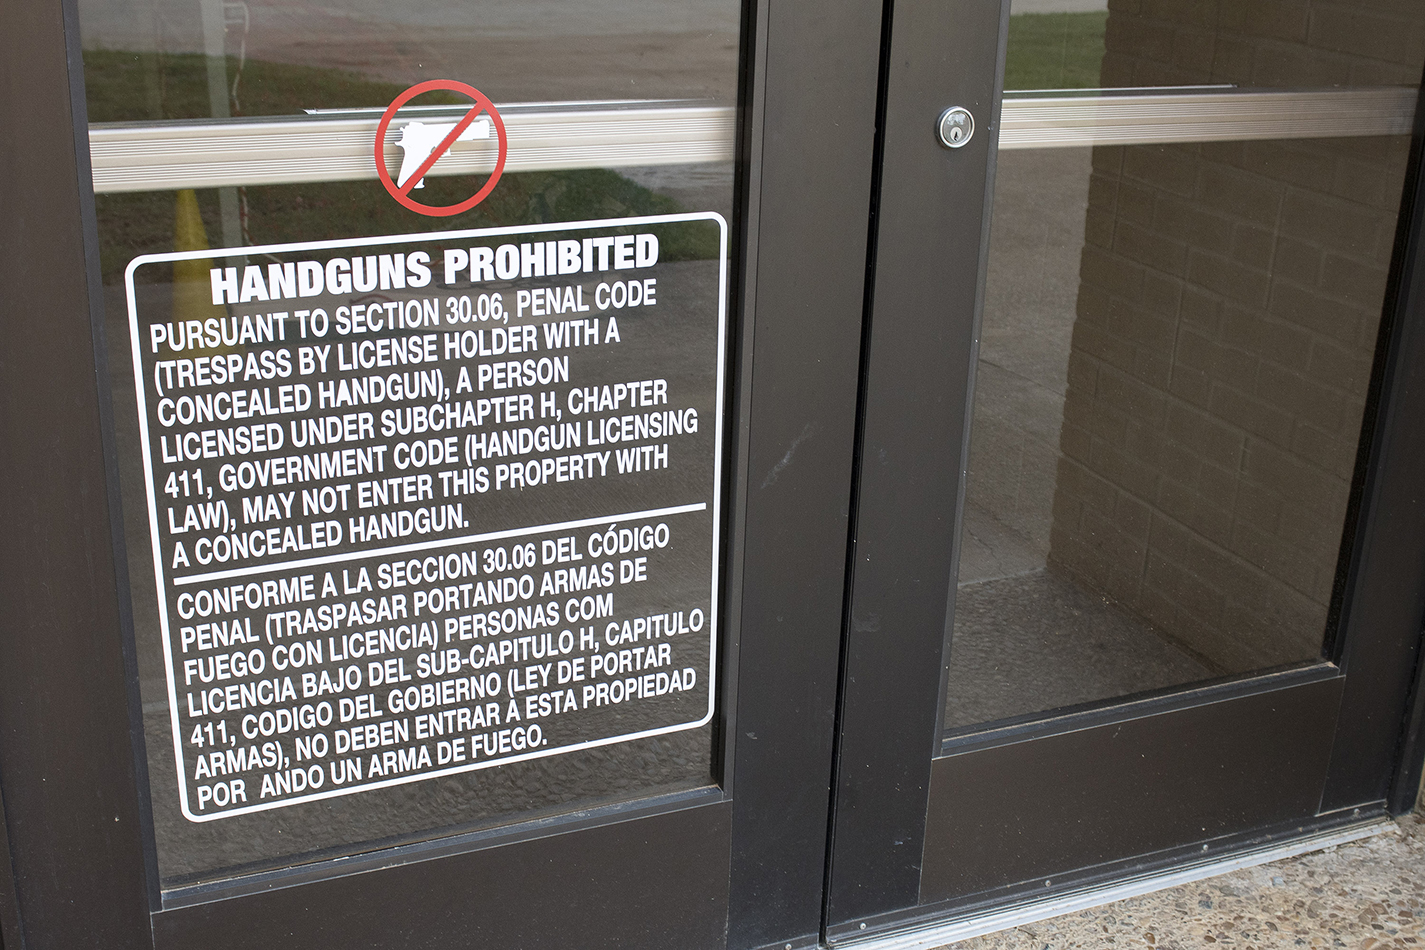 Campus carry signs are now shown around each campus, designating safe zones.